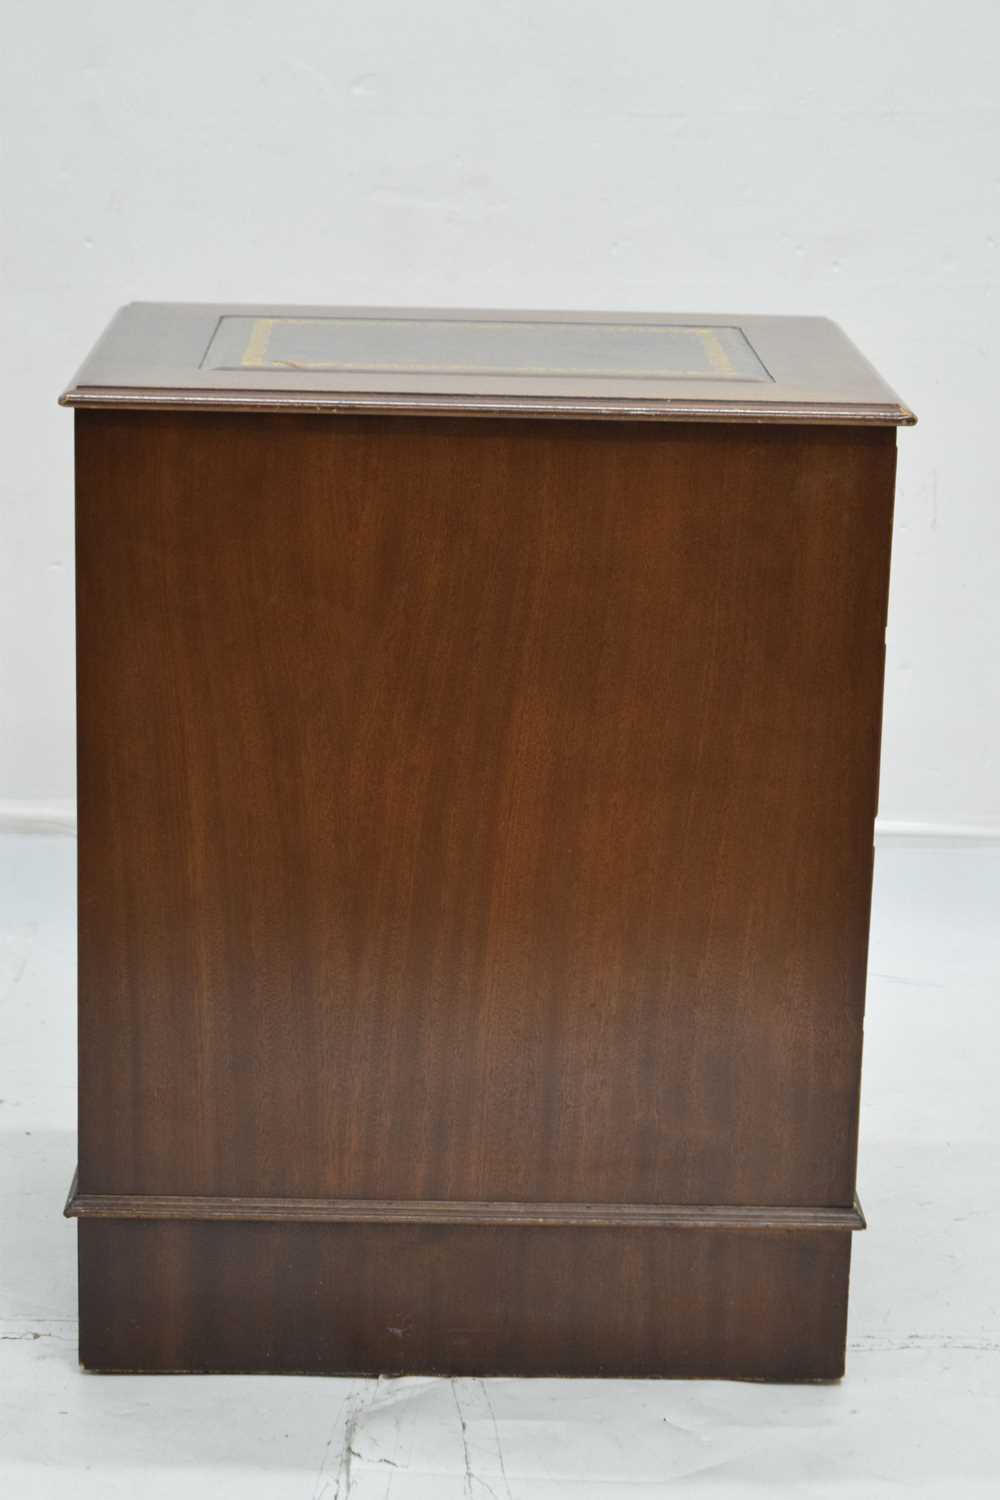 Reproduction mahogany pedestal two drawer filing cabinet - Image 4 of 7